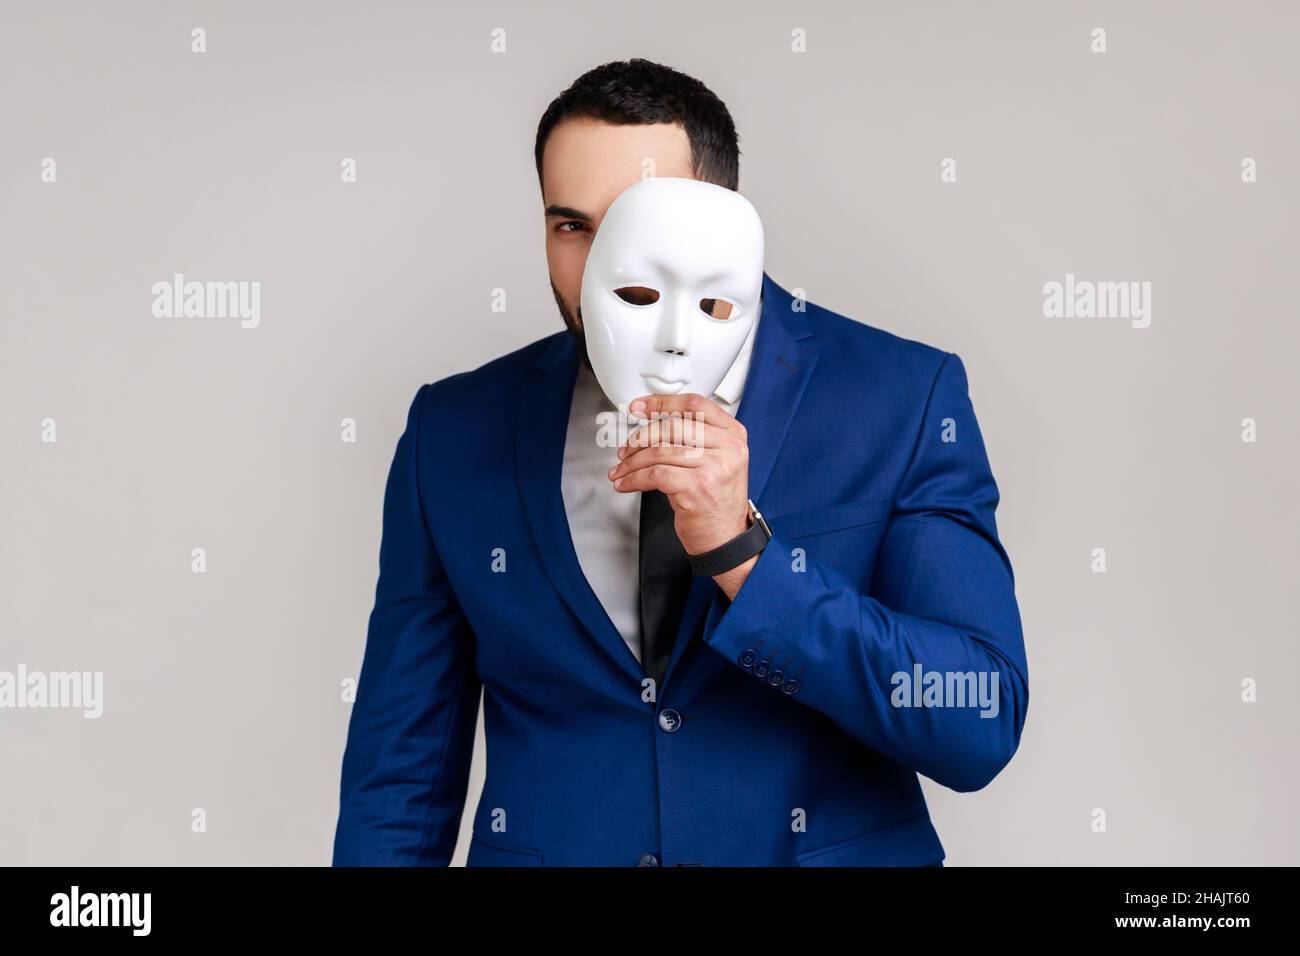 Bearded man holding white mask, covering face, standing with serious expression, multiple personality disorder, wearing official style suit. Indoor studio shot isolated on gray background. Stock Photo